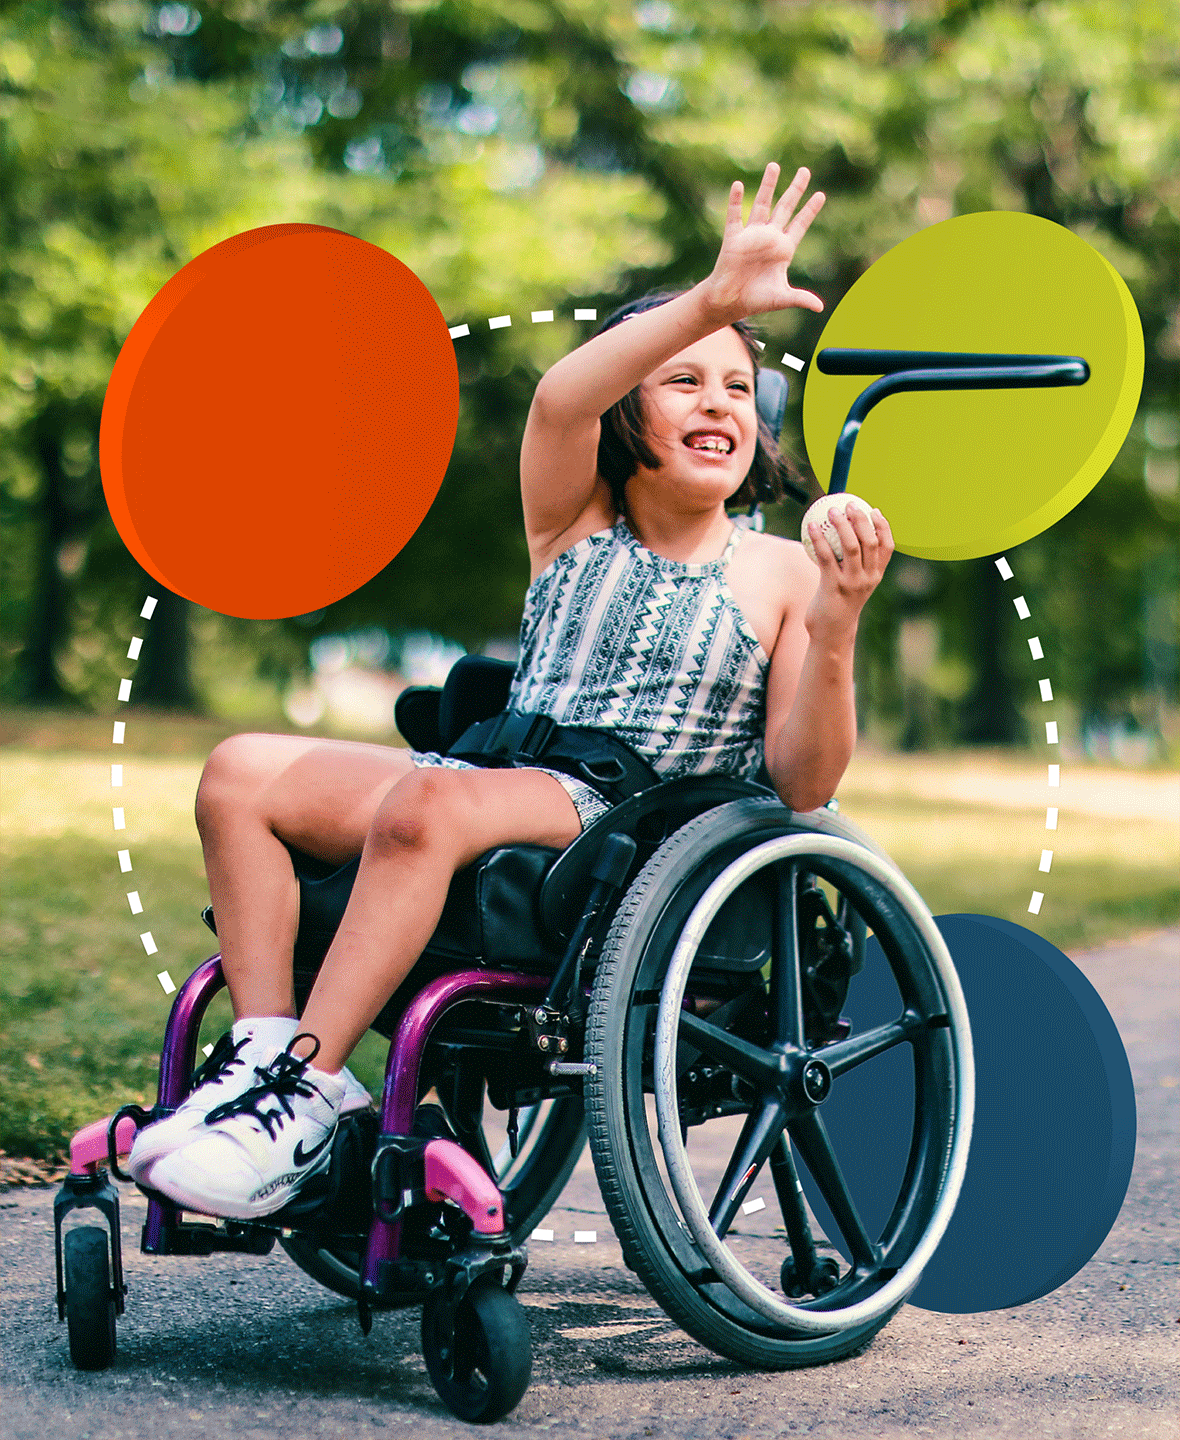 A smiling girl in a wheelchair, catching a baseball, interspersed with principles from the playbook.